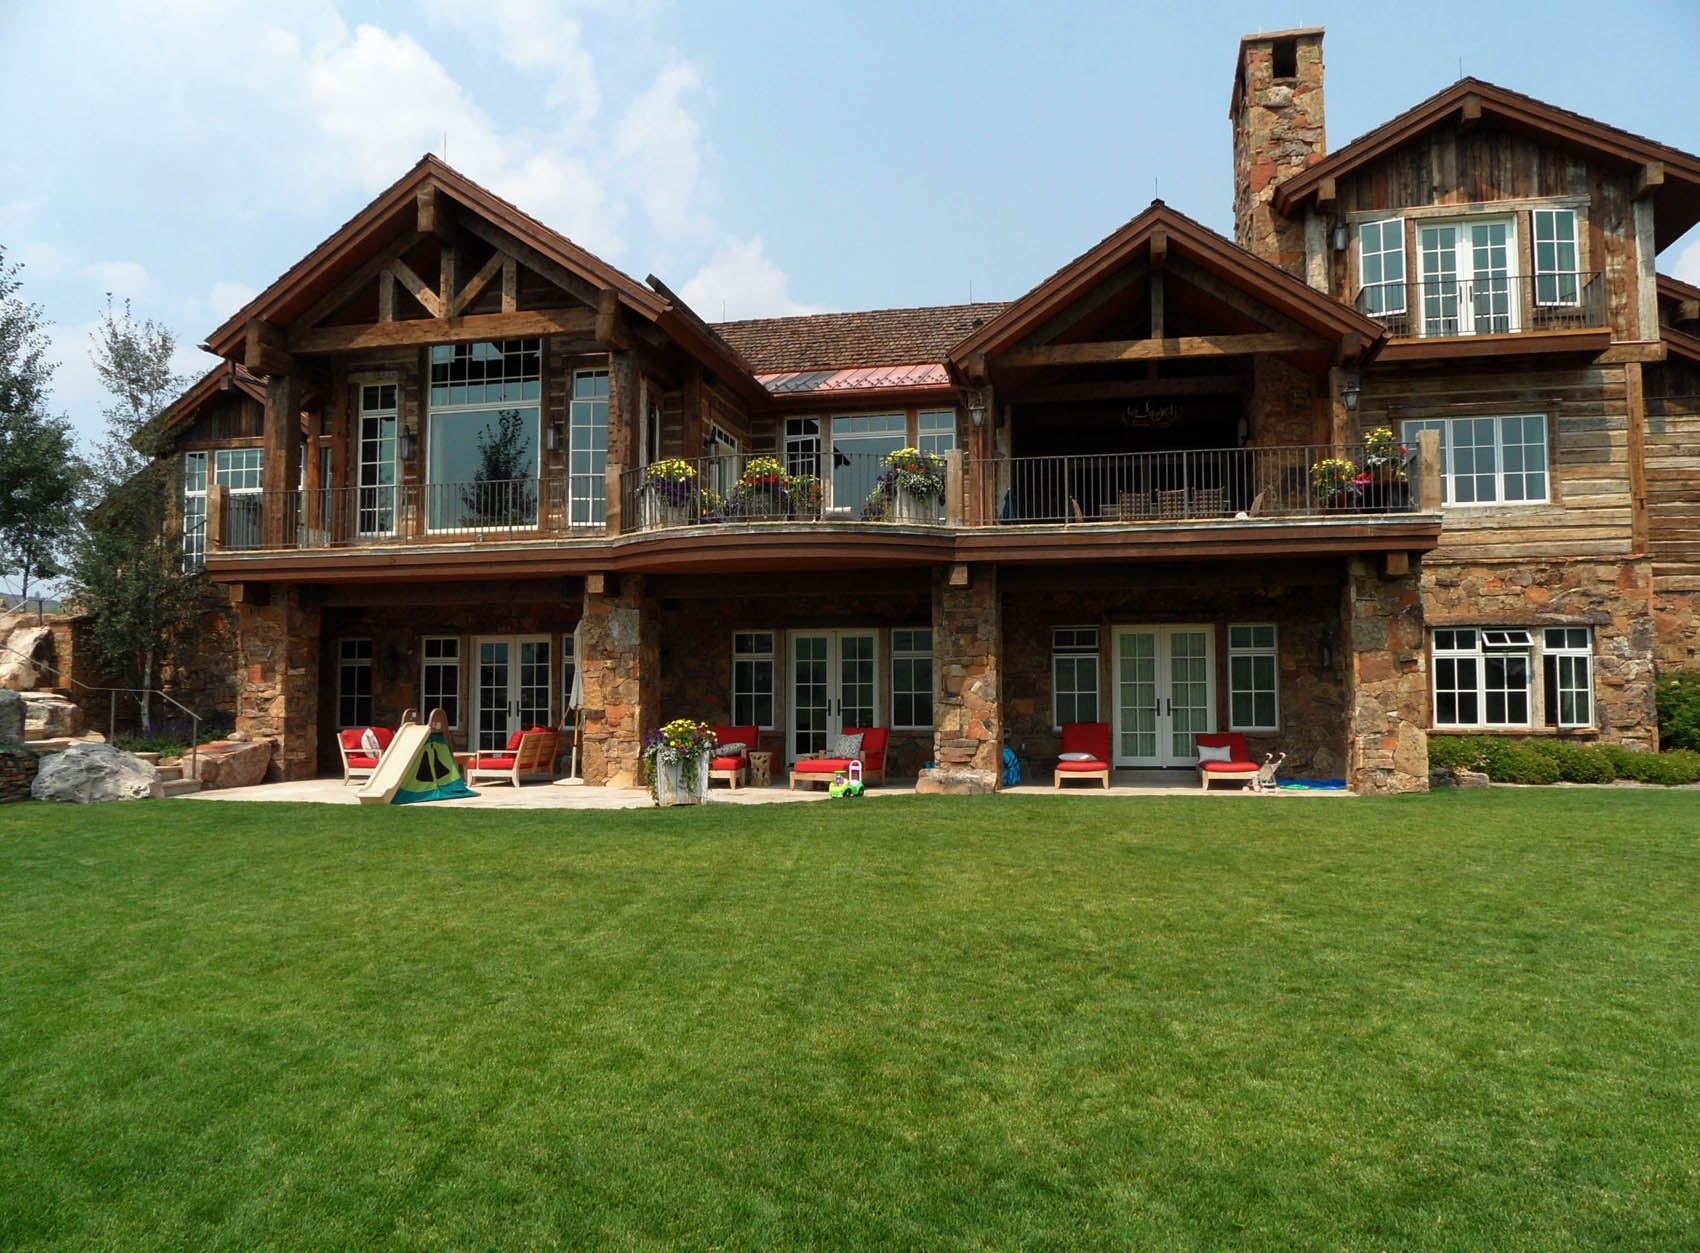 A large two-story house with stone and wood finish, balconies, and a well-manicured lawn with outdoor chairs and children's playthings.